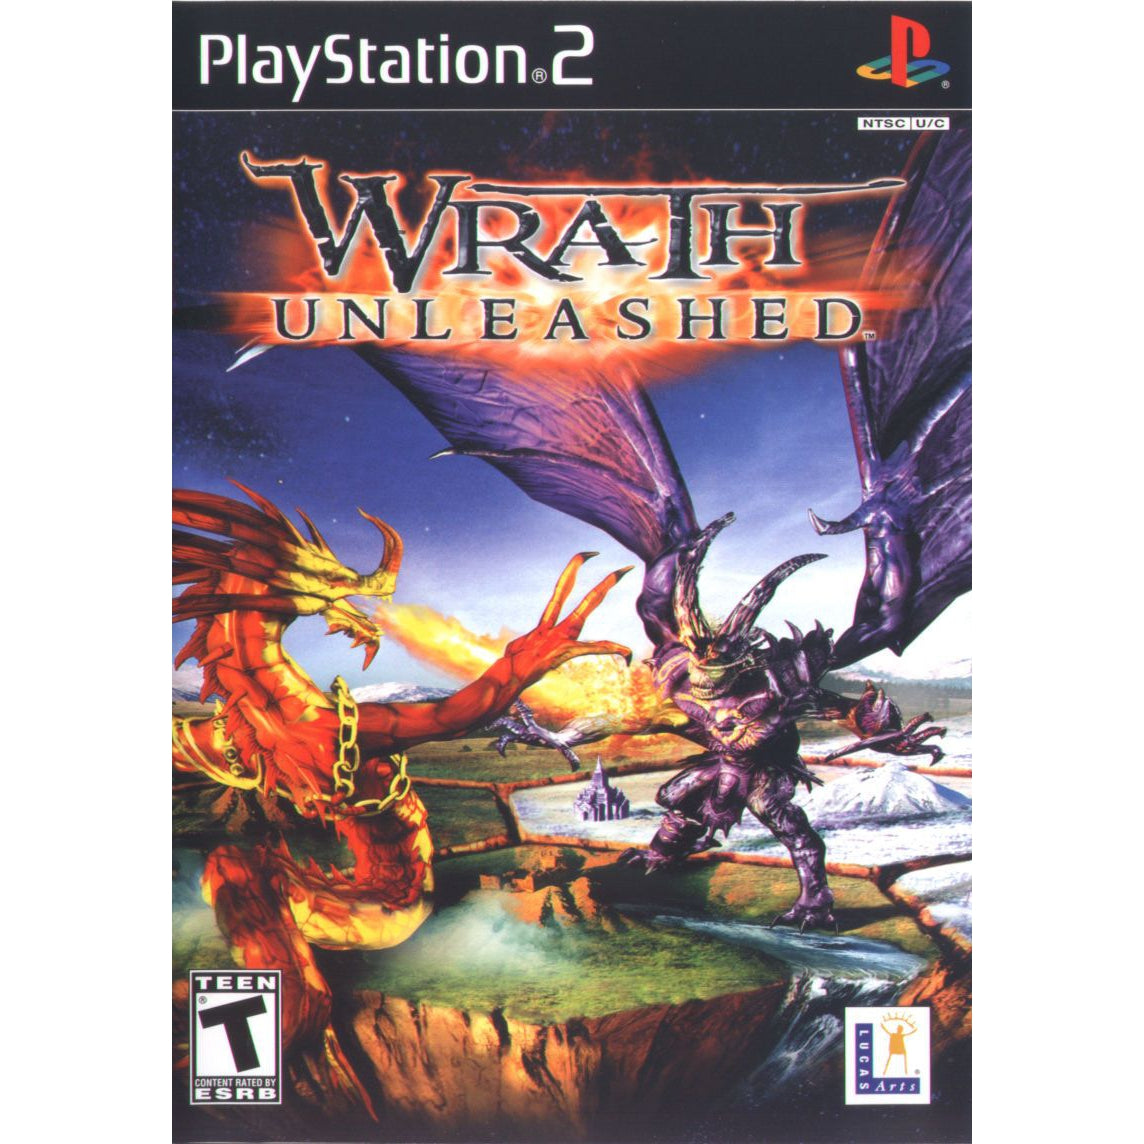 Wrath Unleashed - PlayStation 2 (PS2) Game Complete - YourGamingShop.com - Buy, Sell, Trade Video Games Online. 120 Day Warranty. Satisfaction Guaranteed.